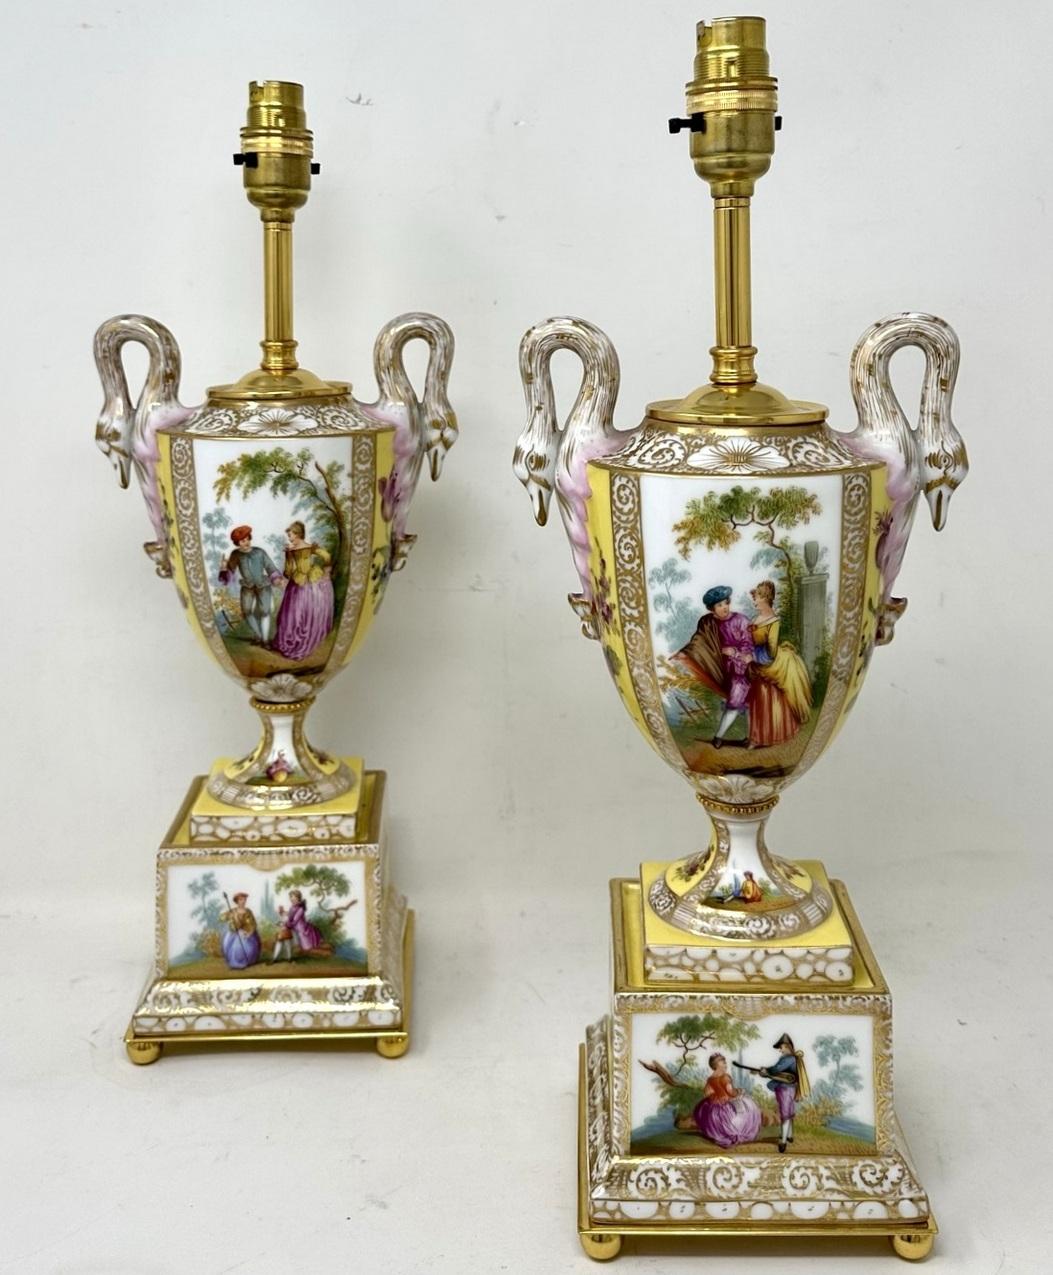 An Imposing and Stunning Pair Austrian Hand Decorated pale yellow ground porcelain and gilt mounted twin swan neck scroll handle Table or Mantle Urns of traditional form, now converted to a Pair of Electric Table Lamps, of outstanding quality and